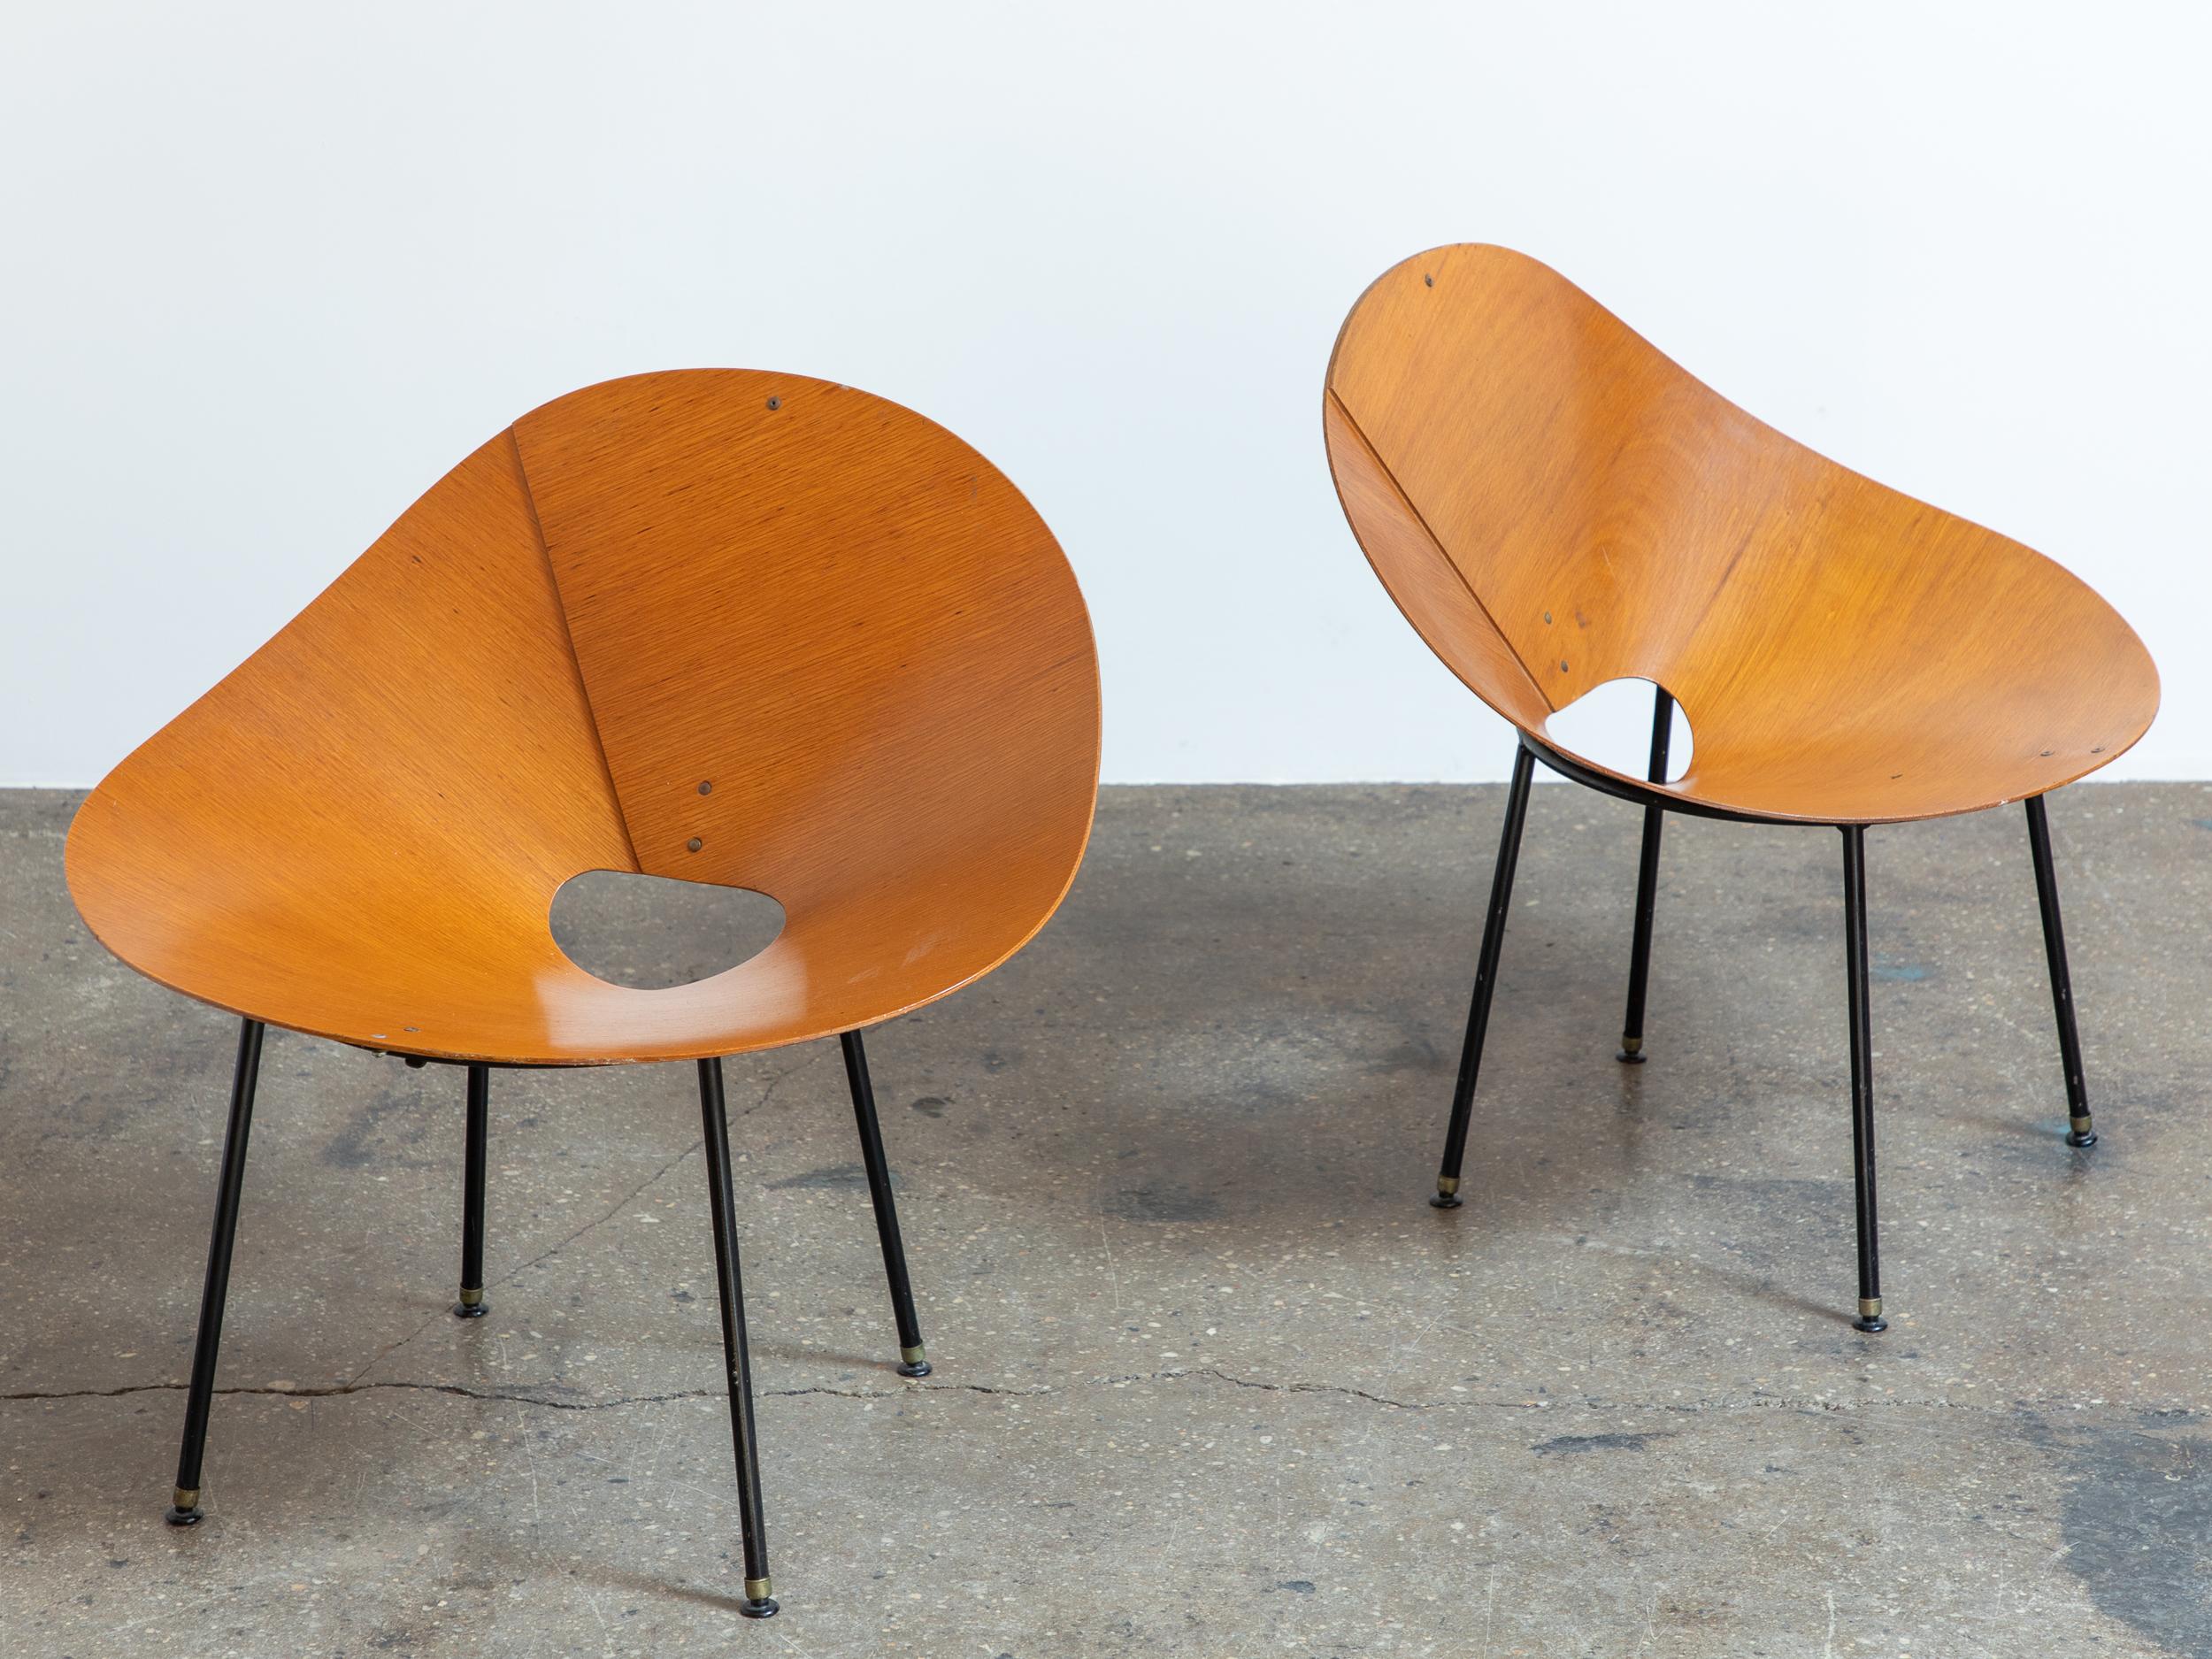 Rare Kone lounge chairs, designed by Australian industrial designer Roger McLay. The seat is formed from a single sheet of plywood, bent into a sleek cone shape. Black steel frame provides sturdy support.  An important Australian design, the chairs